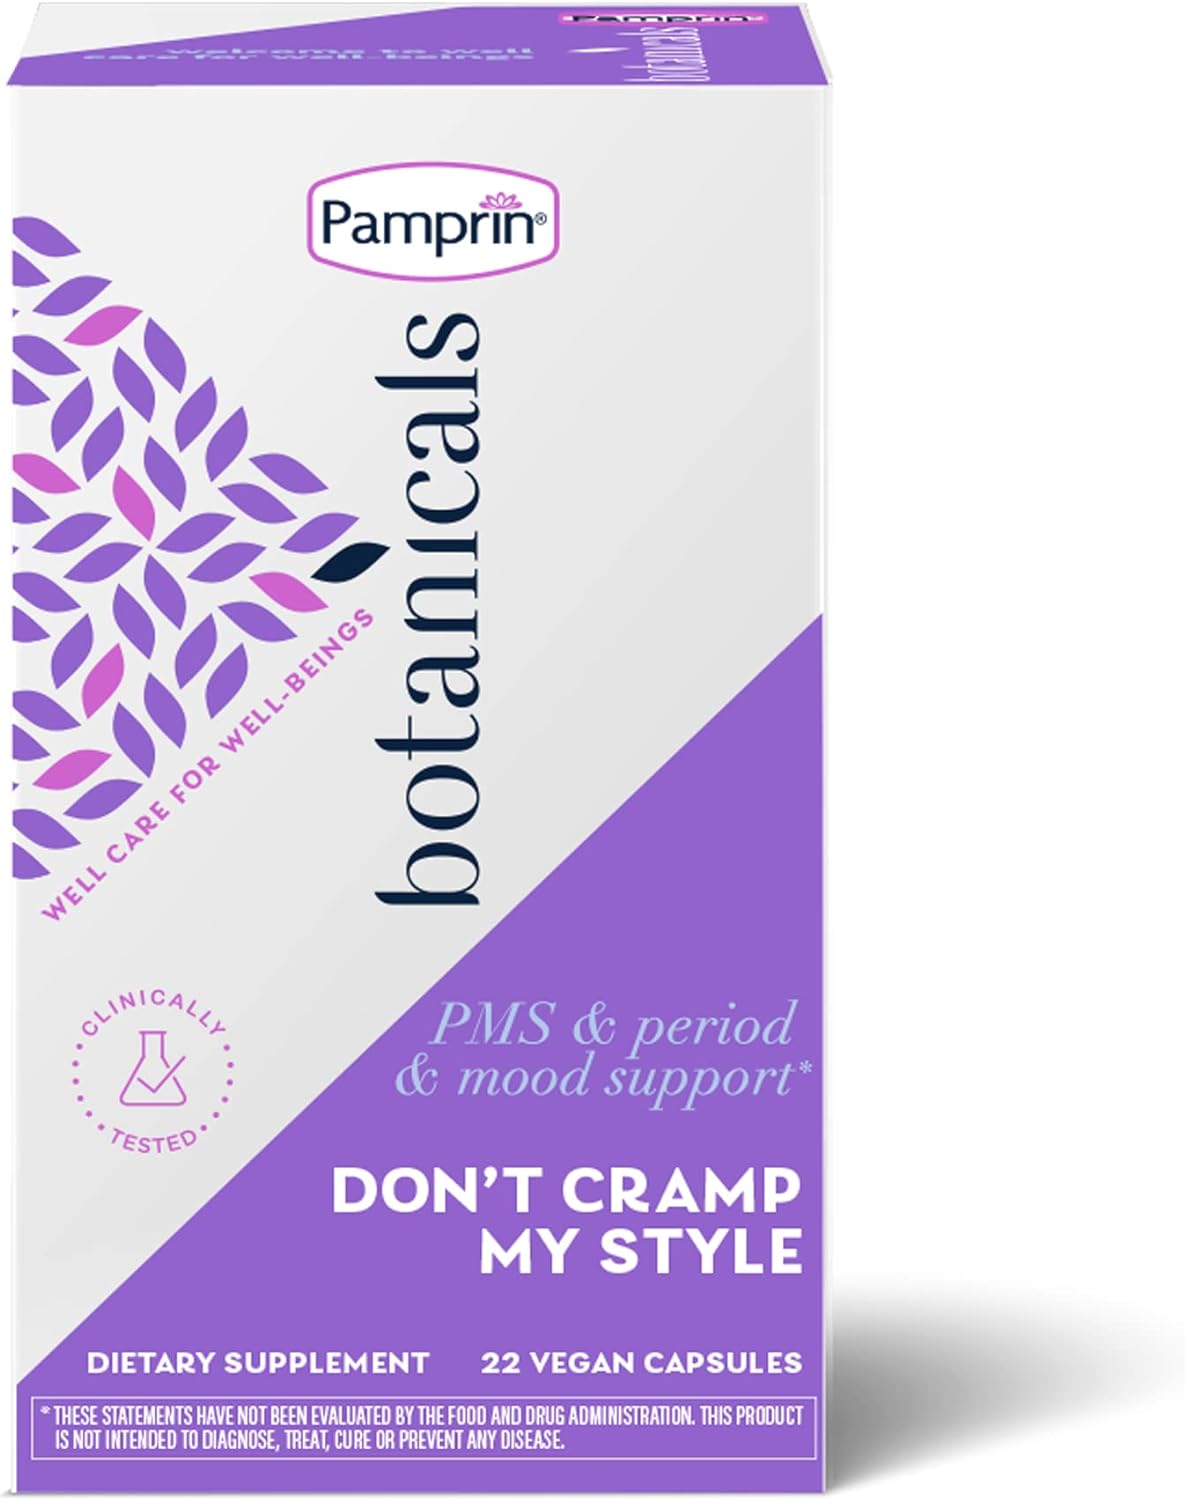 Pamprin Botanicals for PMS & Period Support, Holistic Relief for Cramps, Mood Swings, Bloating, with Ashwagandha, Magnesium, Turmeric, Vitamin B6, Chasteberry 22ct